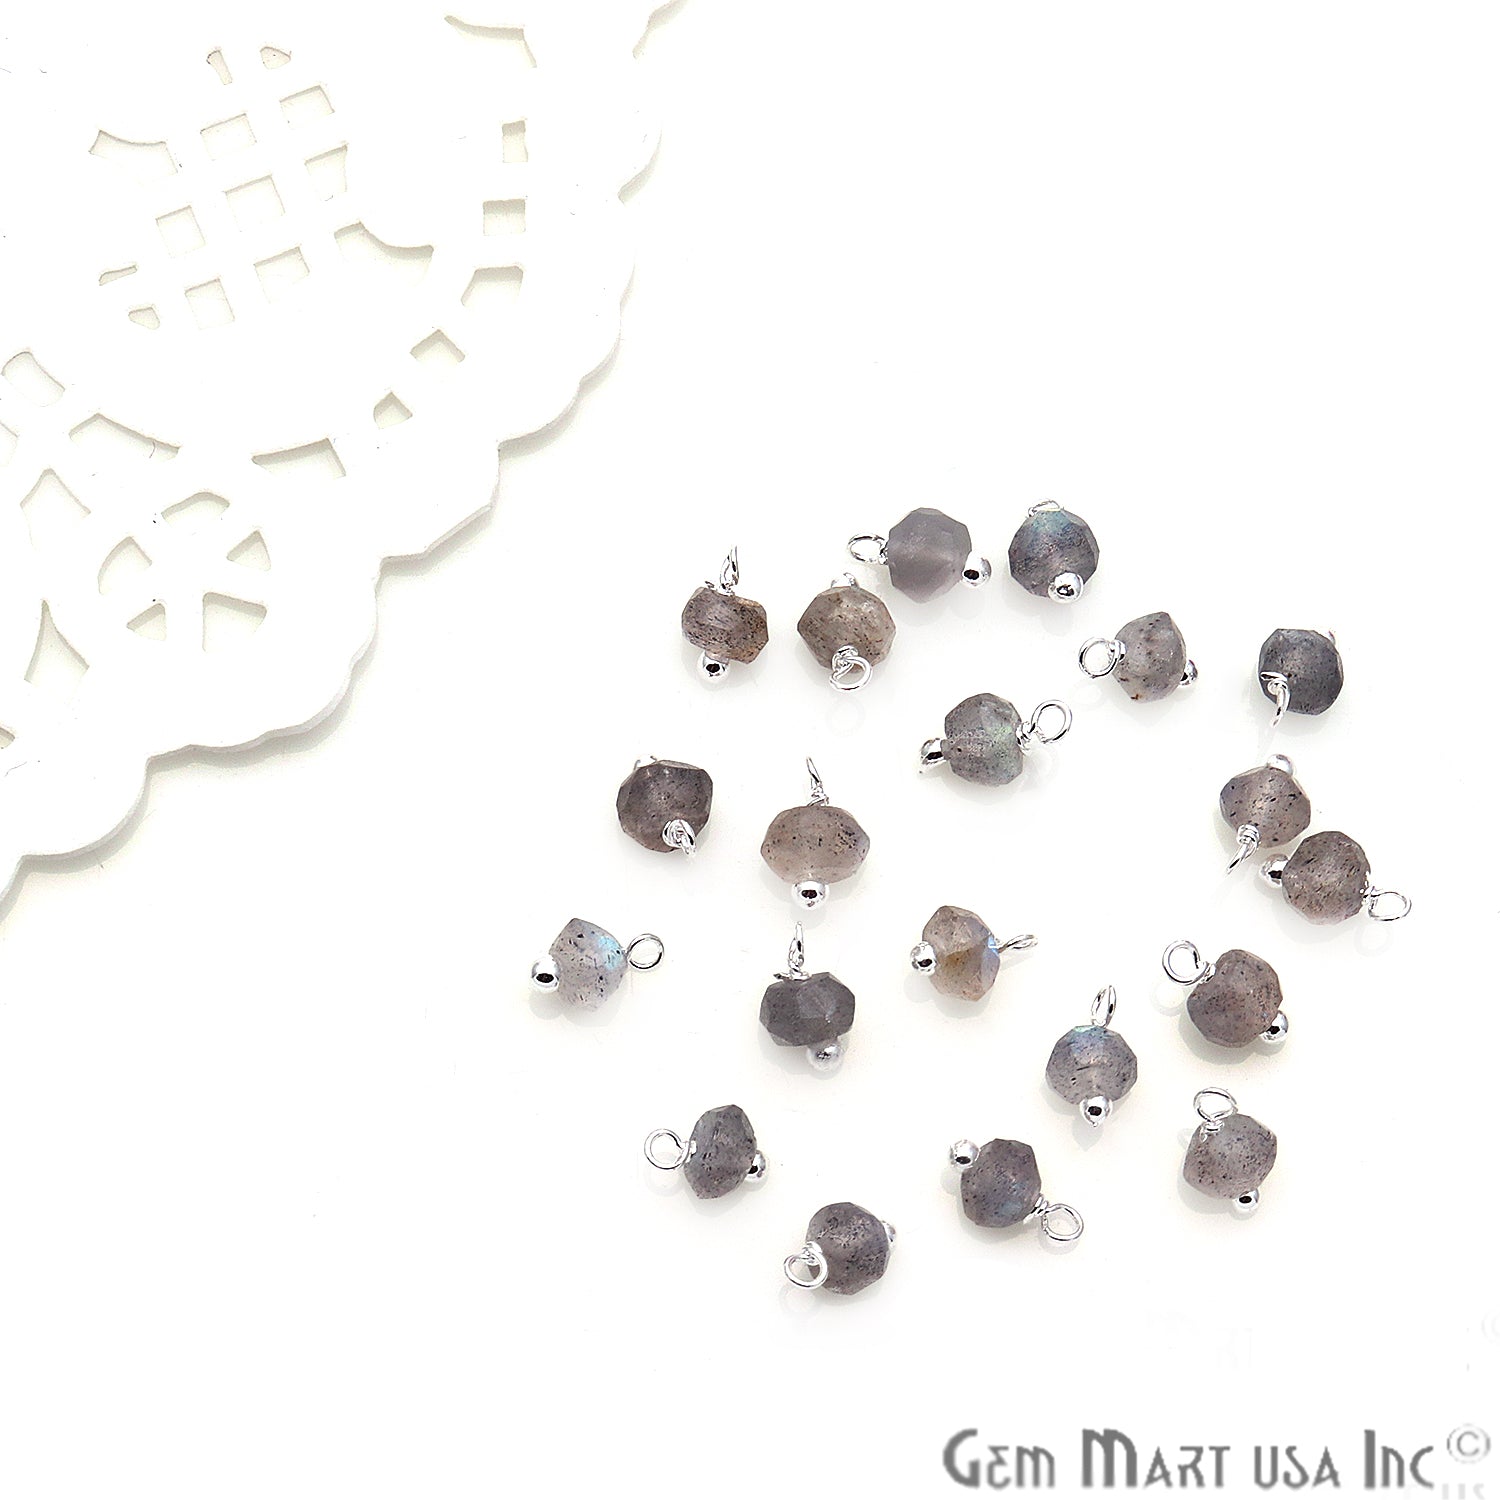 10pc Lot Faceted Tiny Silver Wire Wrapped Connector (Pick Gemstone) - GemMartUSA